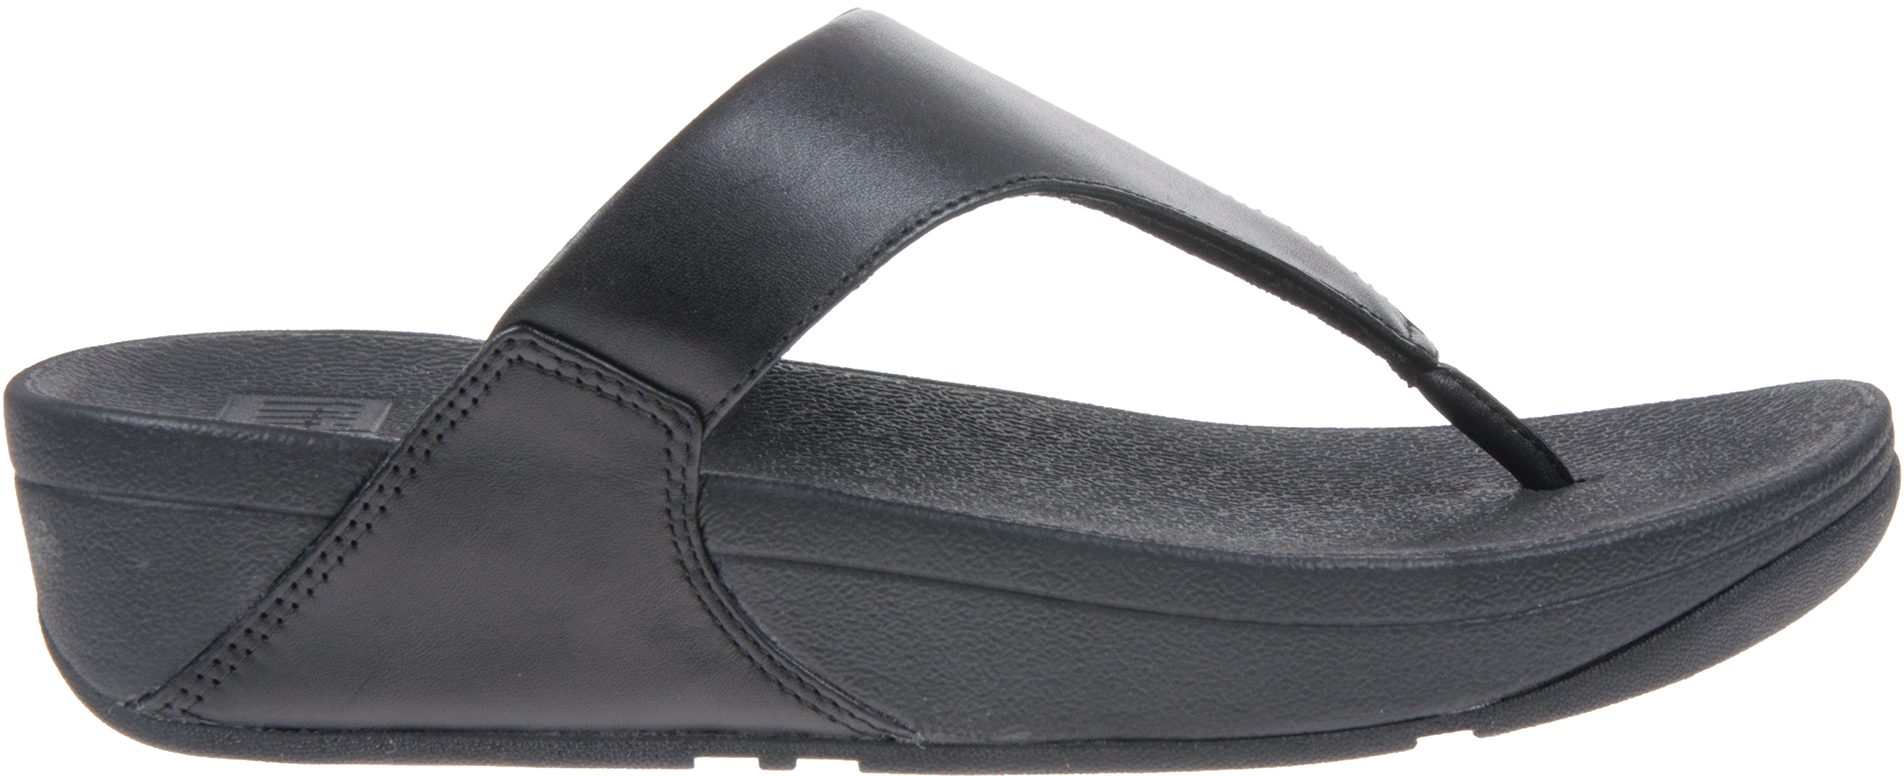 FitFlop Lulu Leather Black I88-001 - Toe Post Sandals - Humphries Shoes